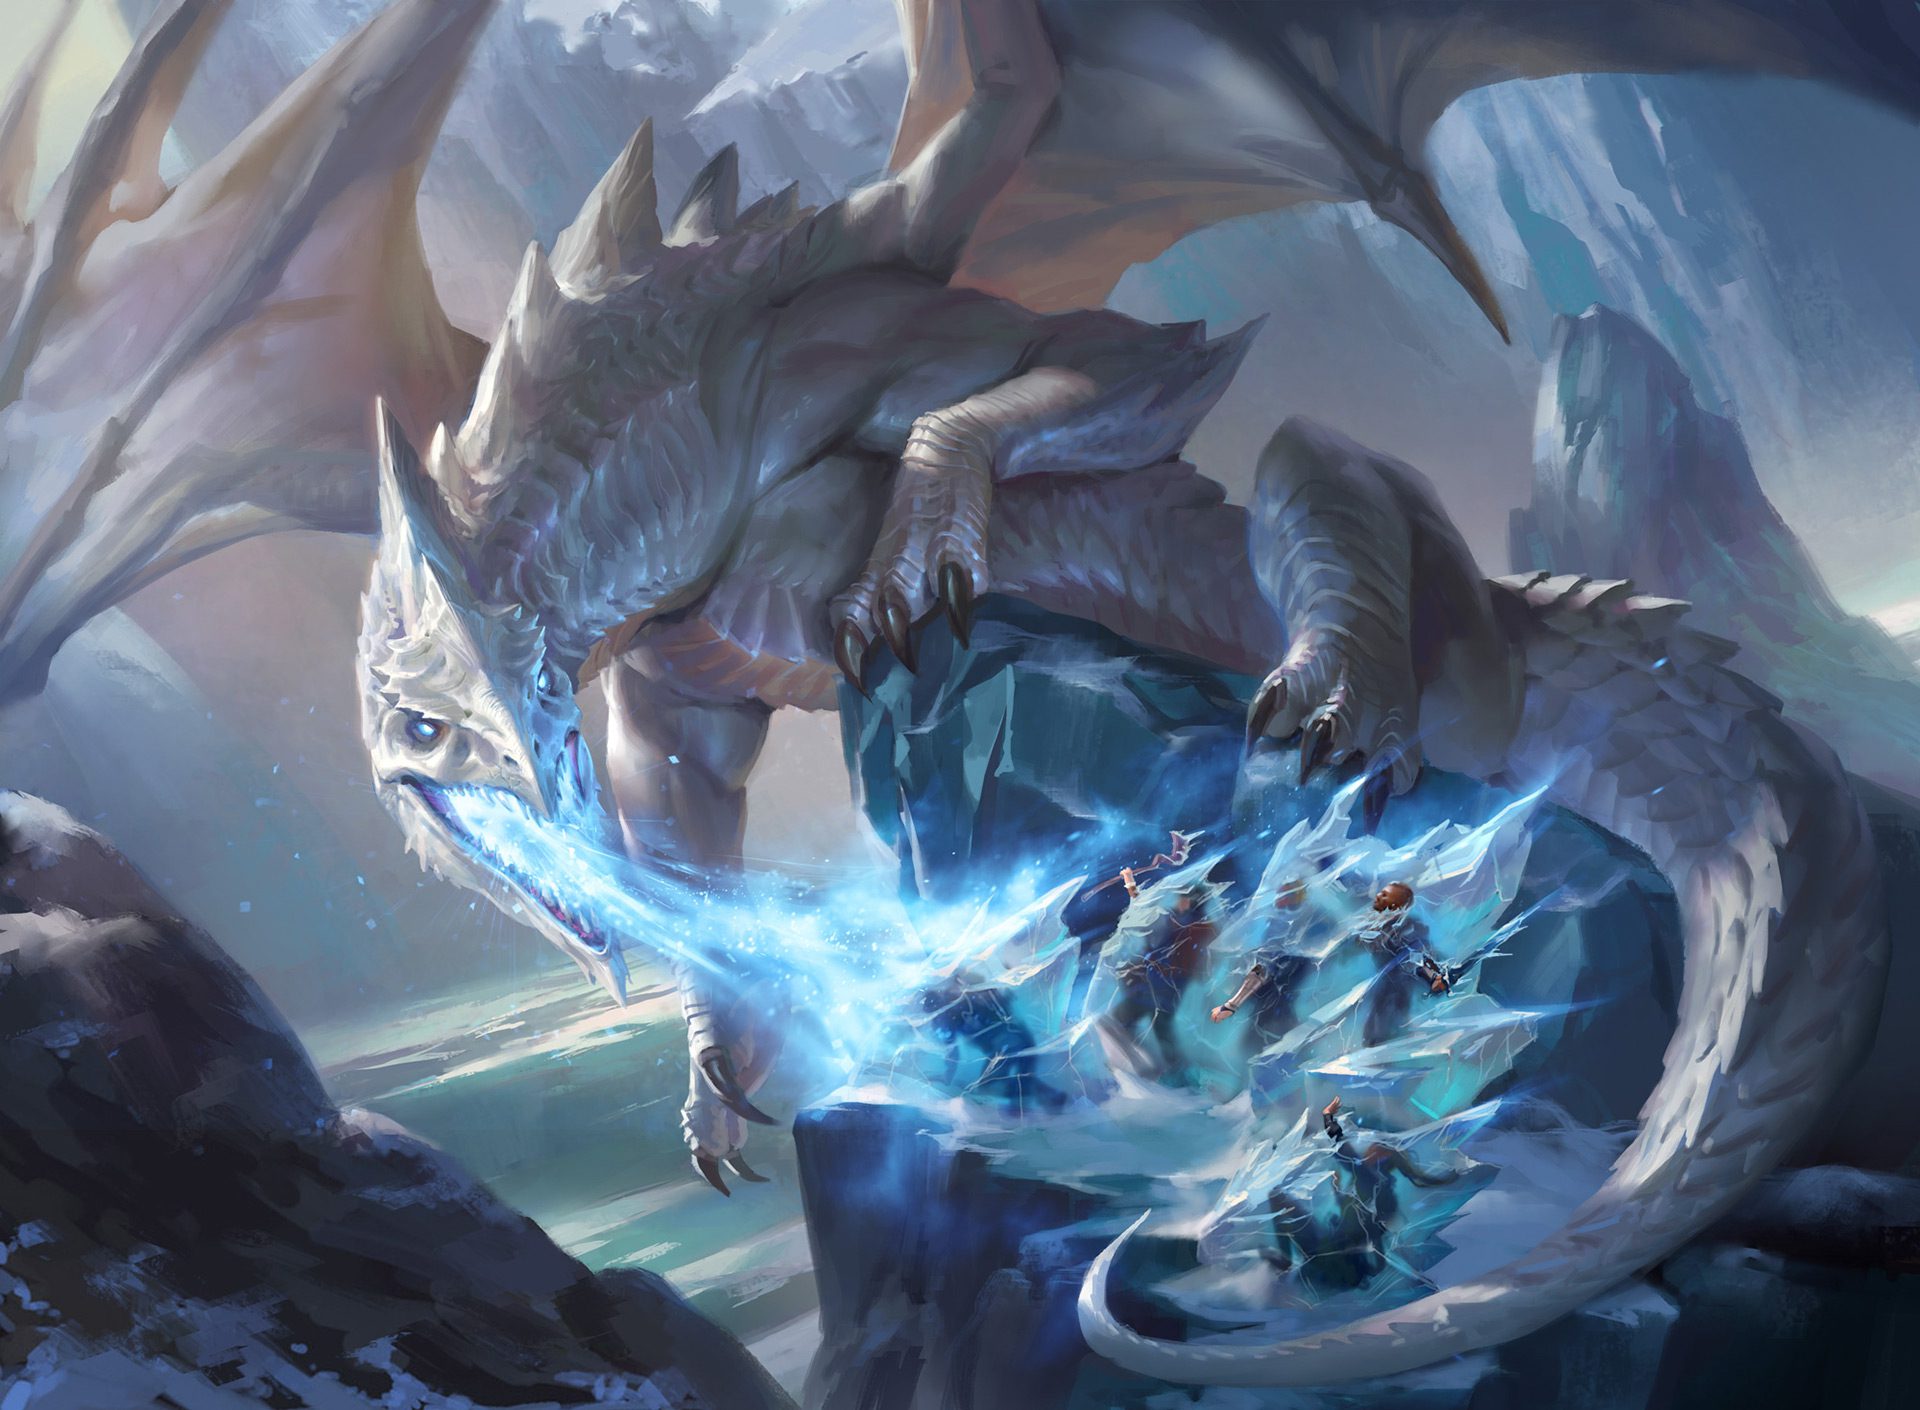 Artwork for the White Dragon in Magic: The Gathering